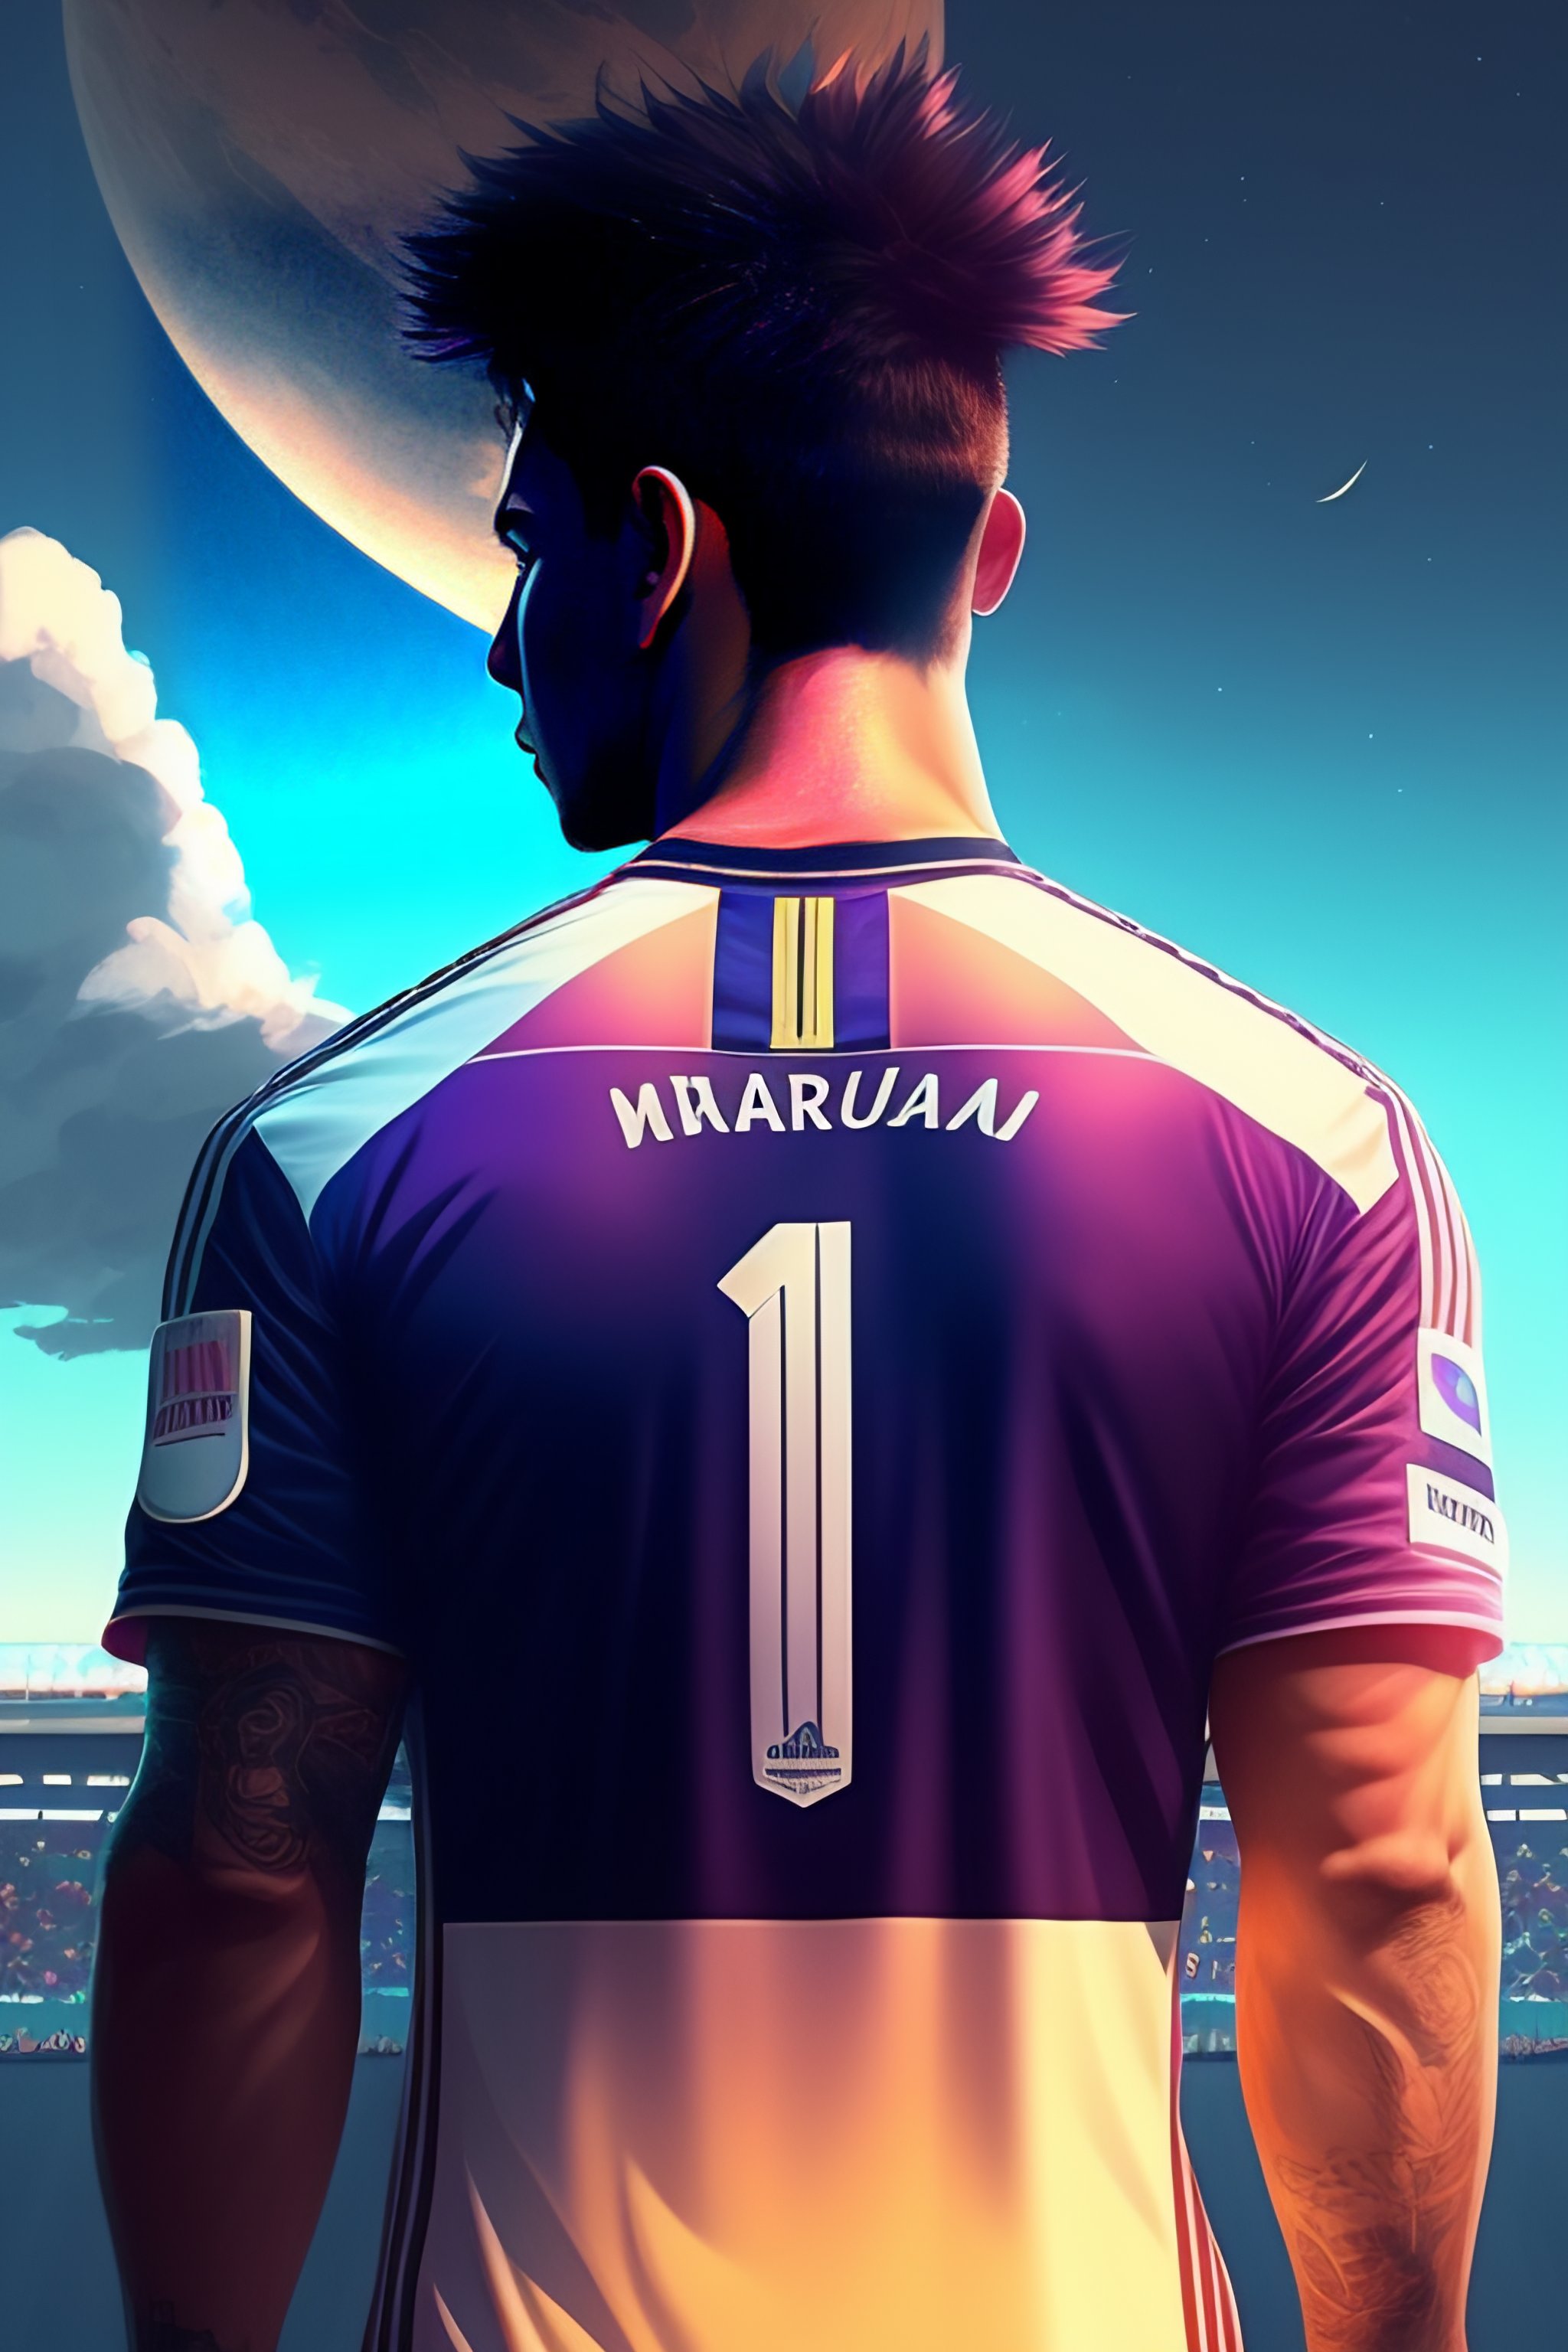 Lexica - Back of a Brazil Footballer wearing 10 yellow brazil team jersey  playing football, backdrop of dawn, saturn in the background,  illustration